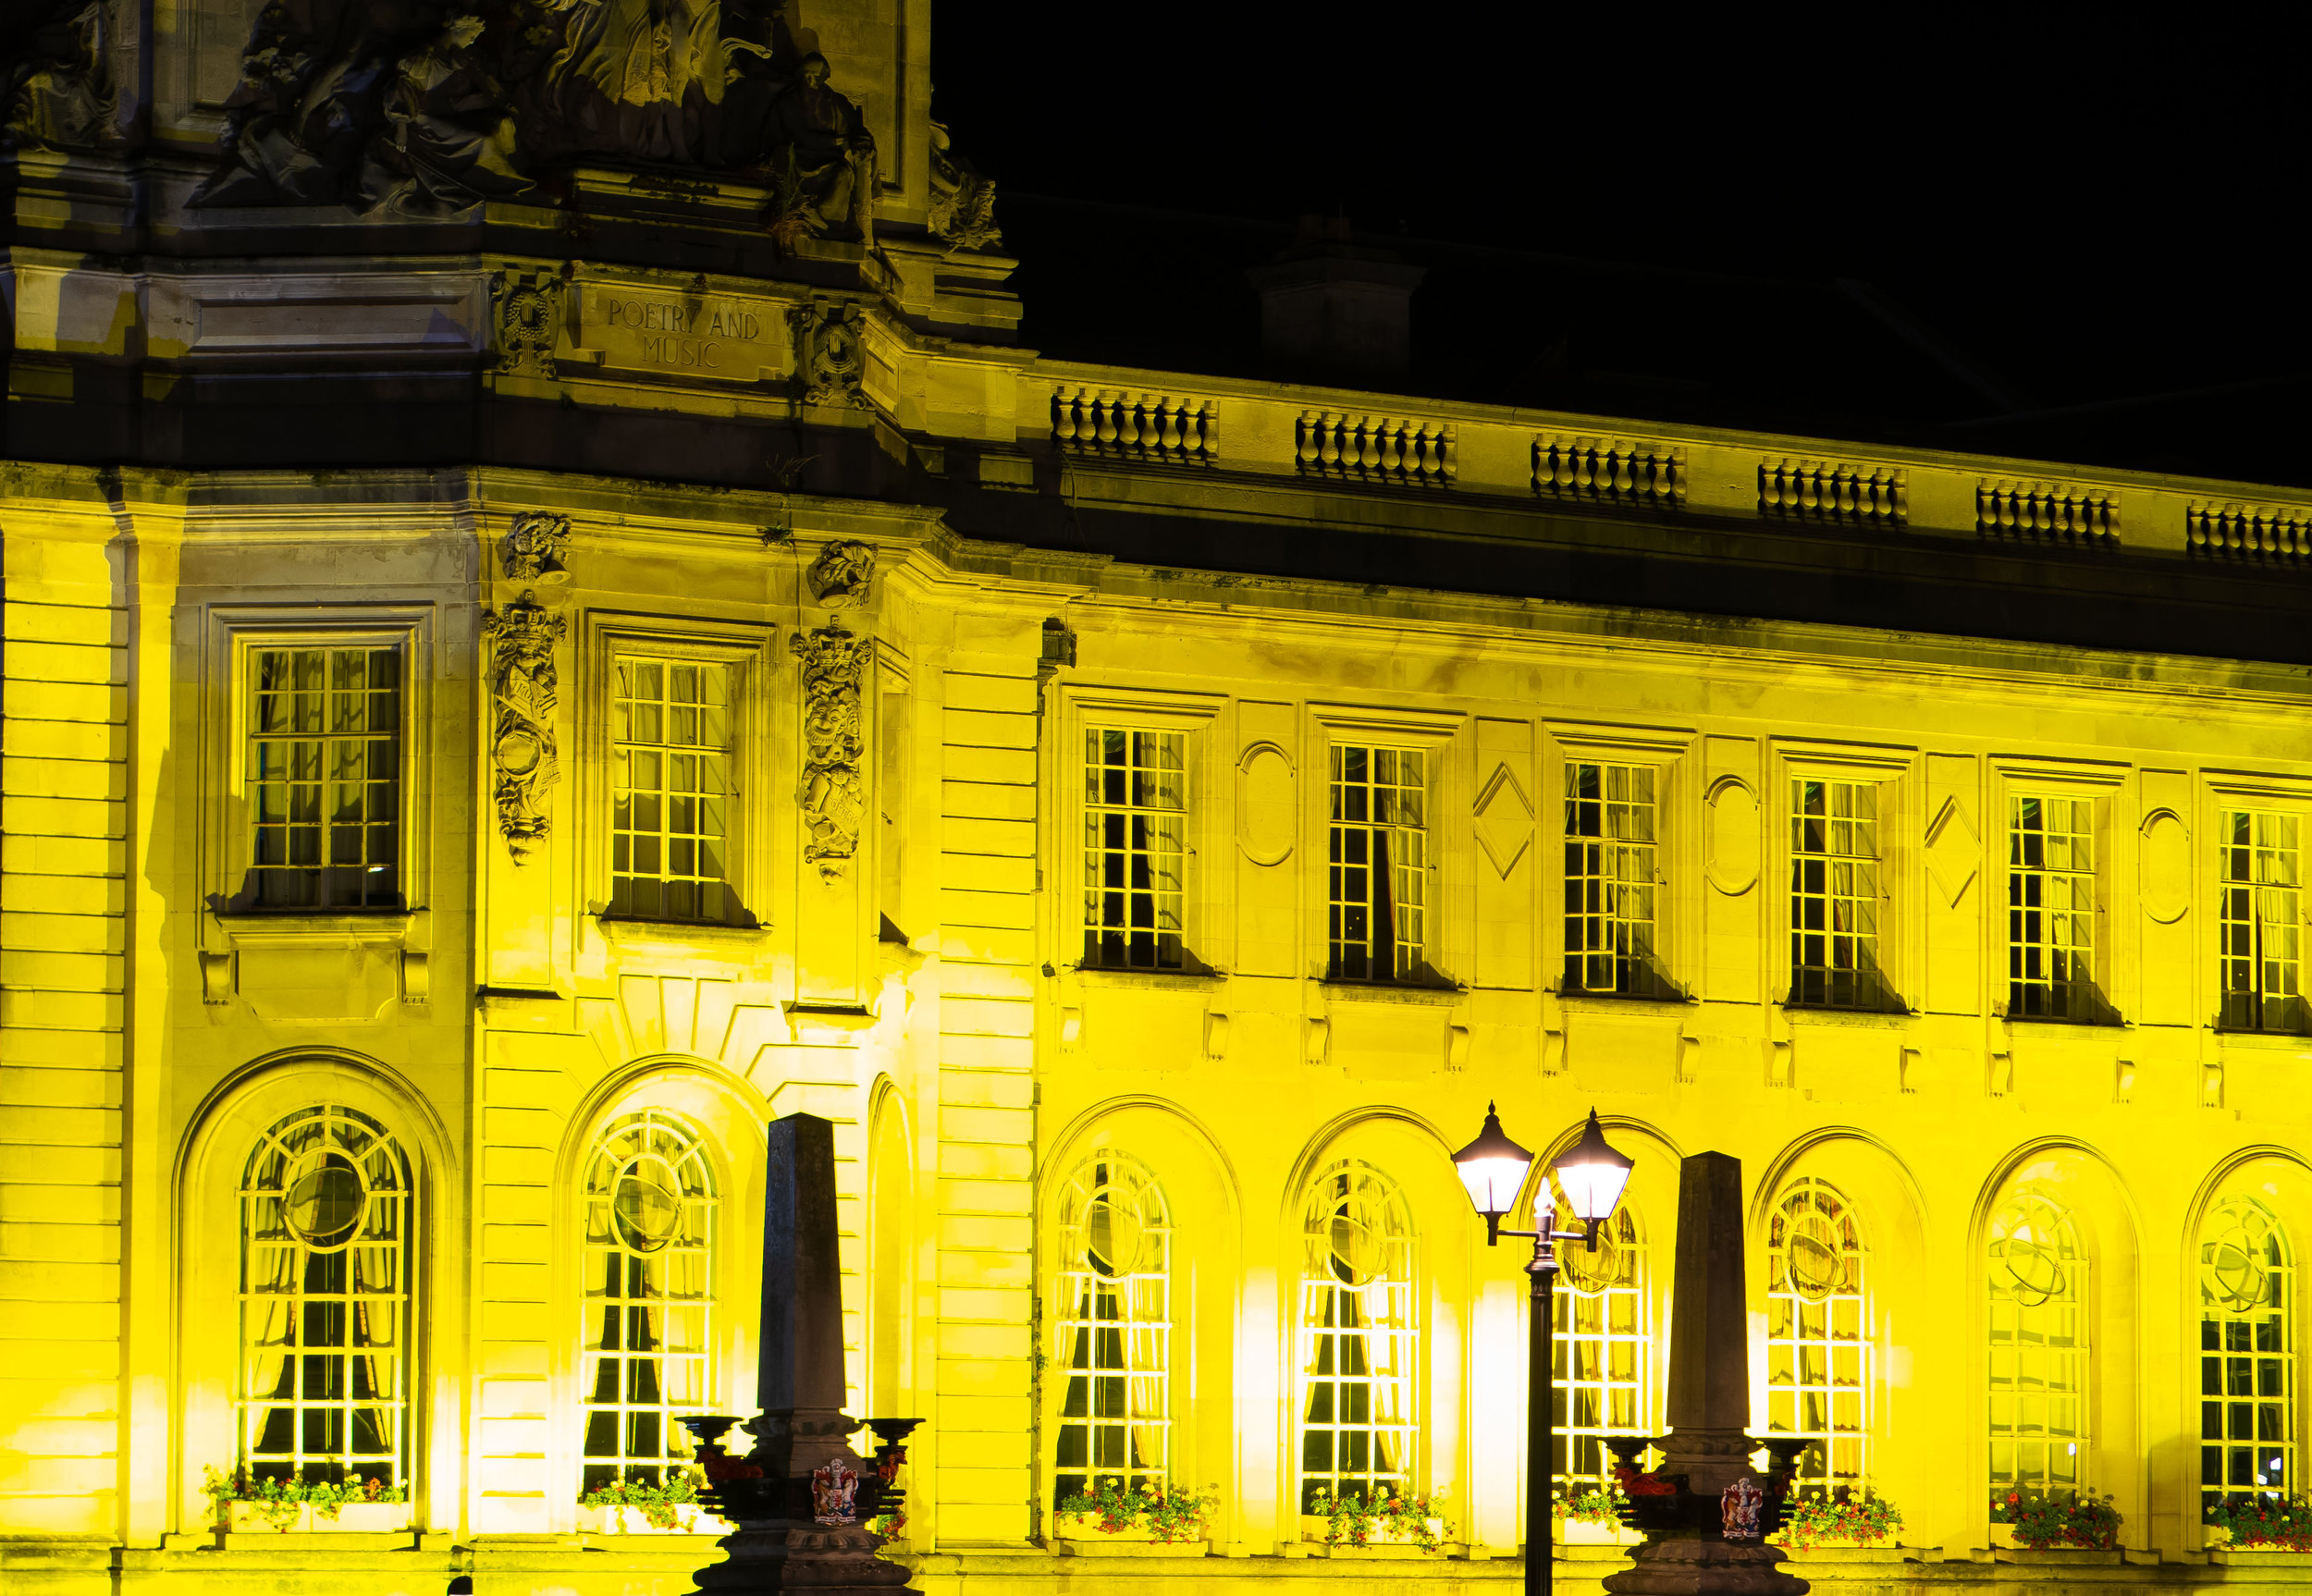  CARDIFF, WALES - JULY 29: Cardiff City Hall is seen illuminated in yellow light following cyclist Geraint Thomas' victory in the Tour De France on July 29, 2018 in Cardiff, Wales. Team Sky's Geraint Thomas, who was born in Cardiff, is the first Wels